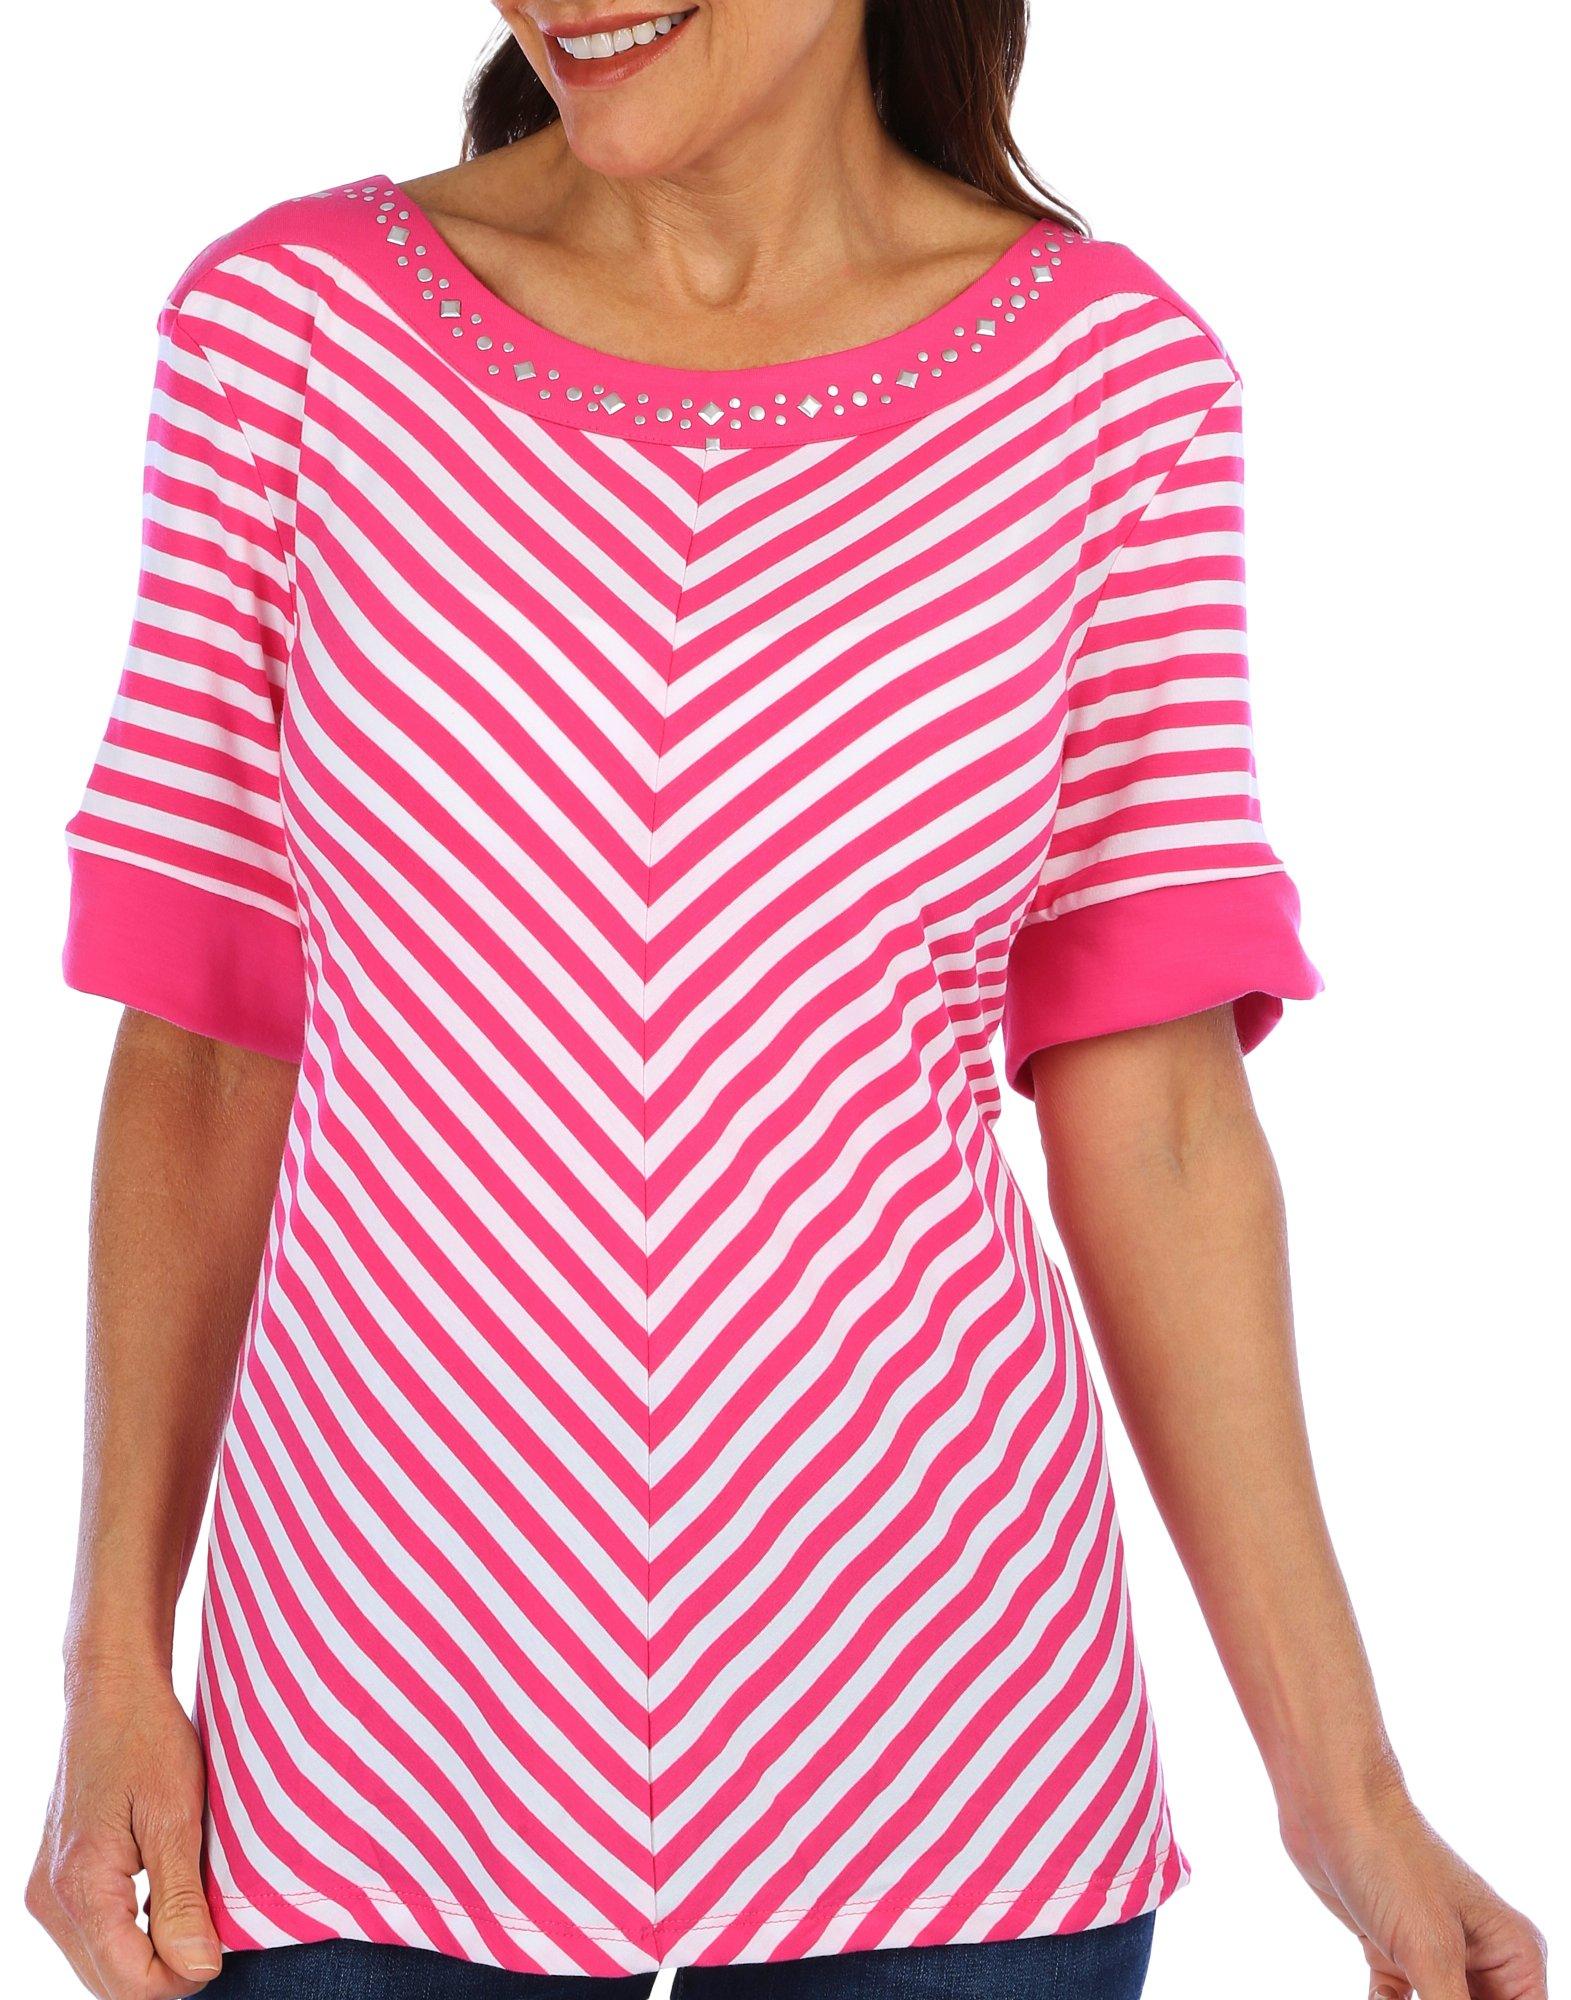 Coral Bay Womens Embellished Striped Short Sleeve Top